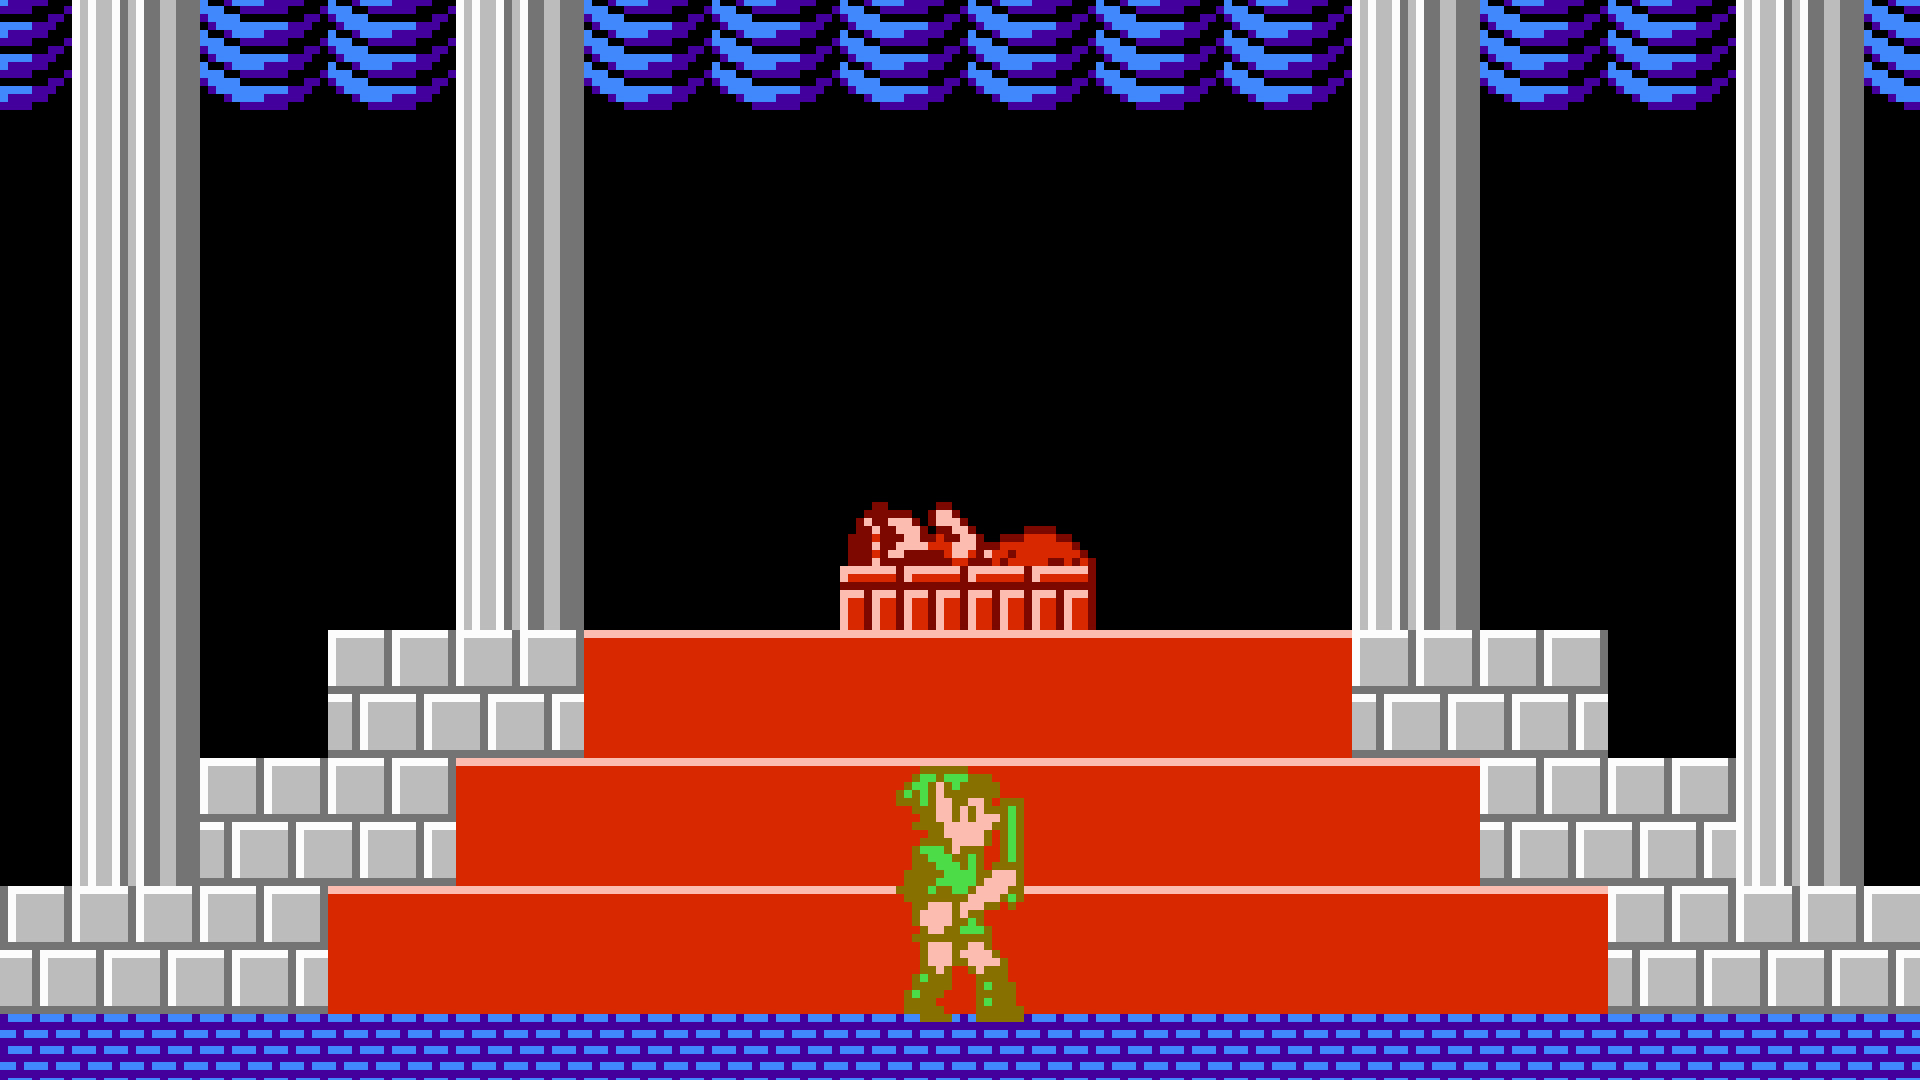 Zelda II: The Adventure of Link is better than you think.